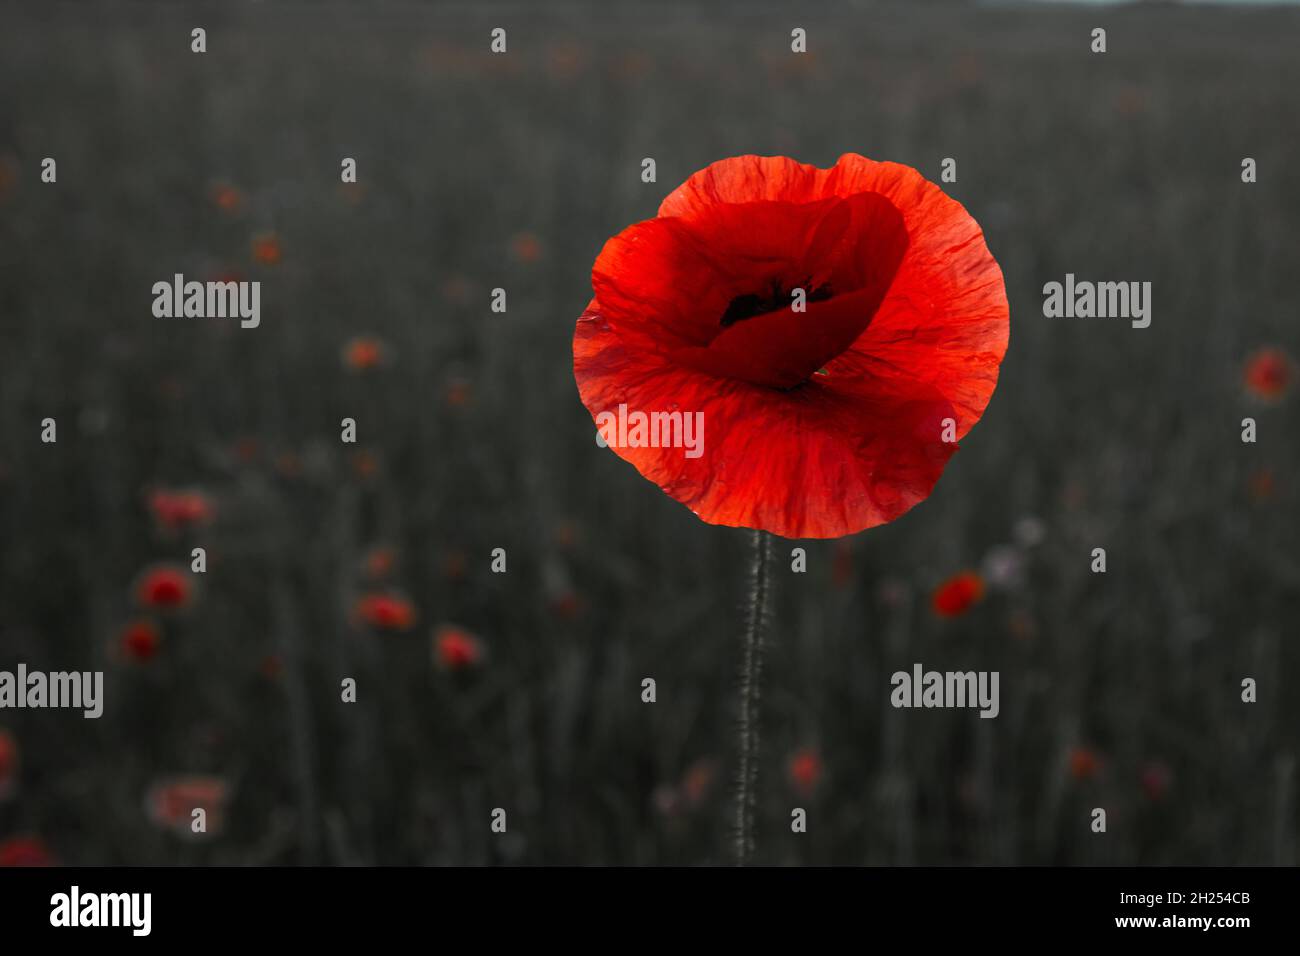 Remembrance day poppy. Red poppies in a poppies field with desaturated background Stock Photo